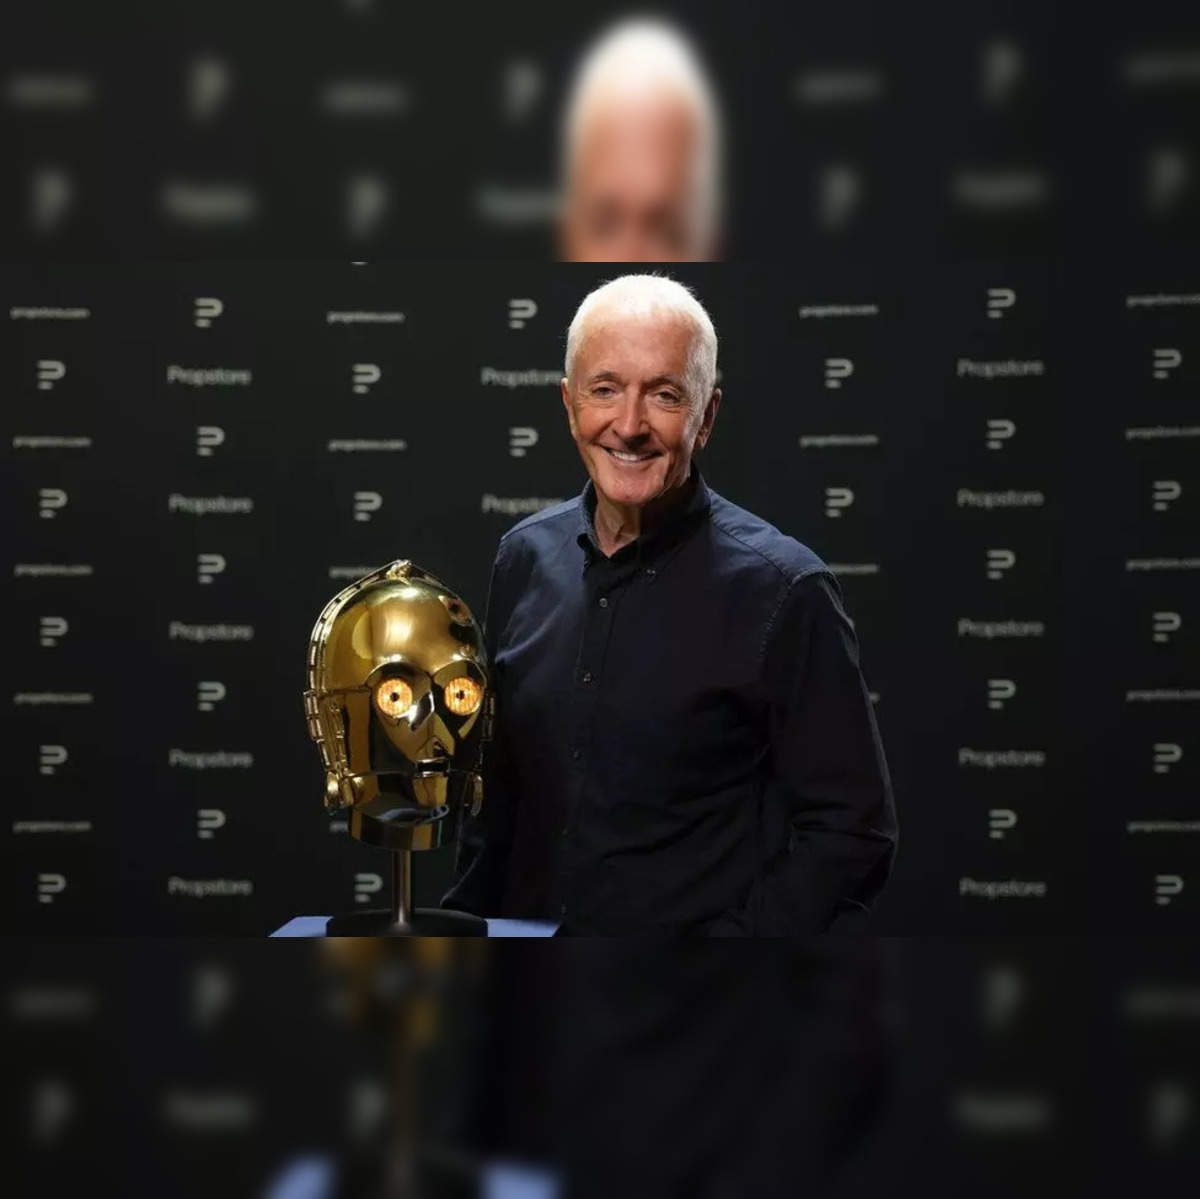 https://img.etimg.com/thumb/width-1200,height-1200,imgsize-19498,resizemode-75,msid-105104454/news/international/us/anthony-daniels-why-is-star-wars-c-3po-actor-selling-his-film-collectibles.jpg